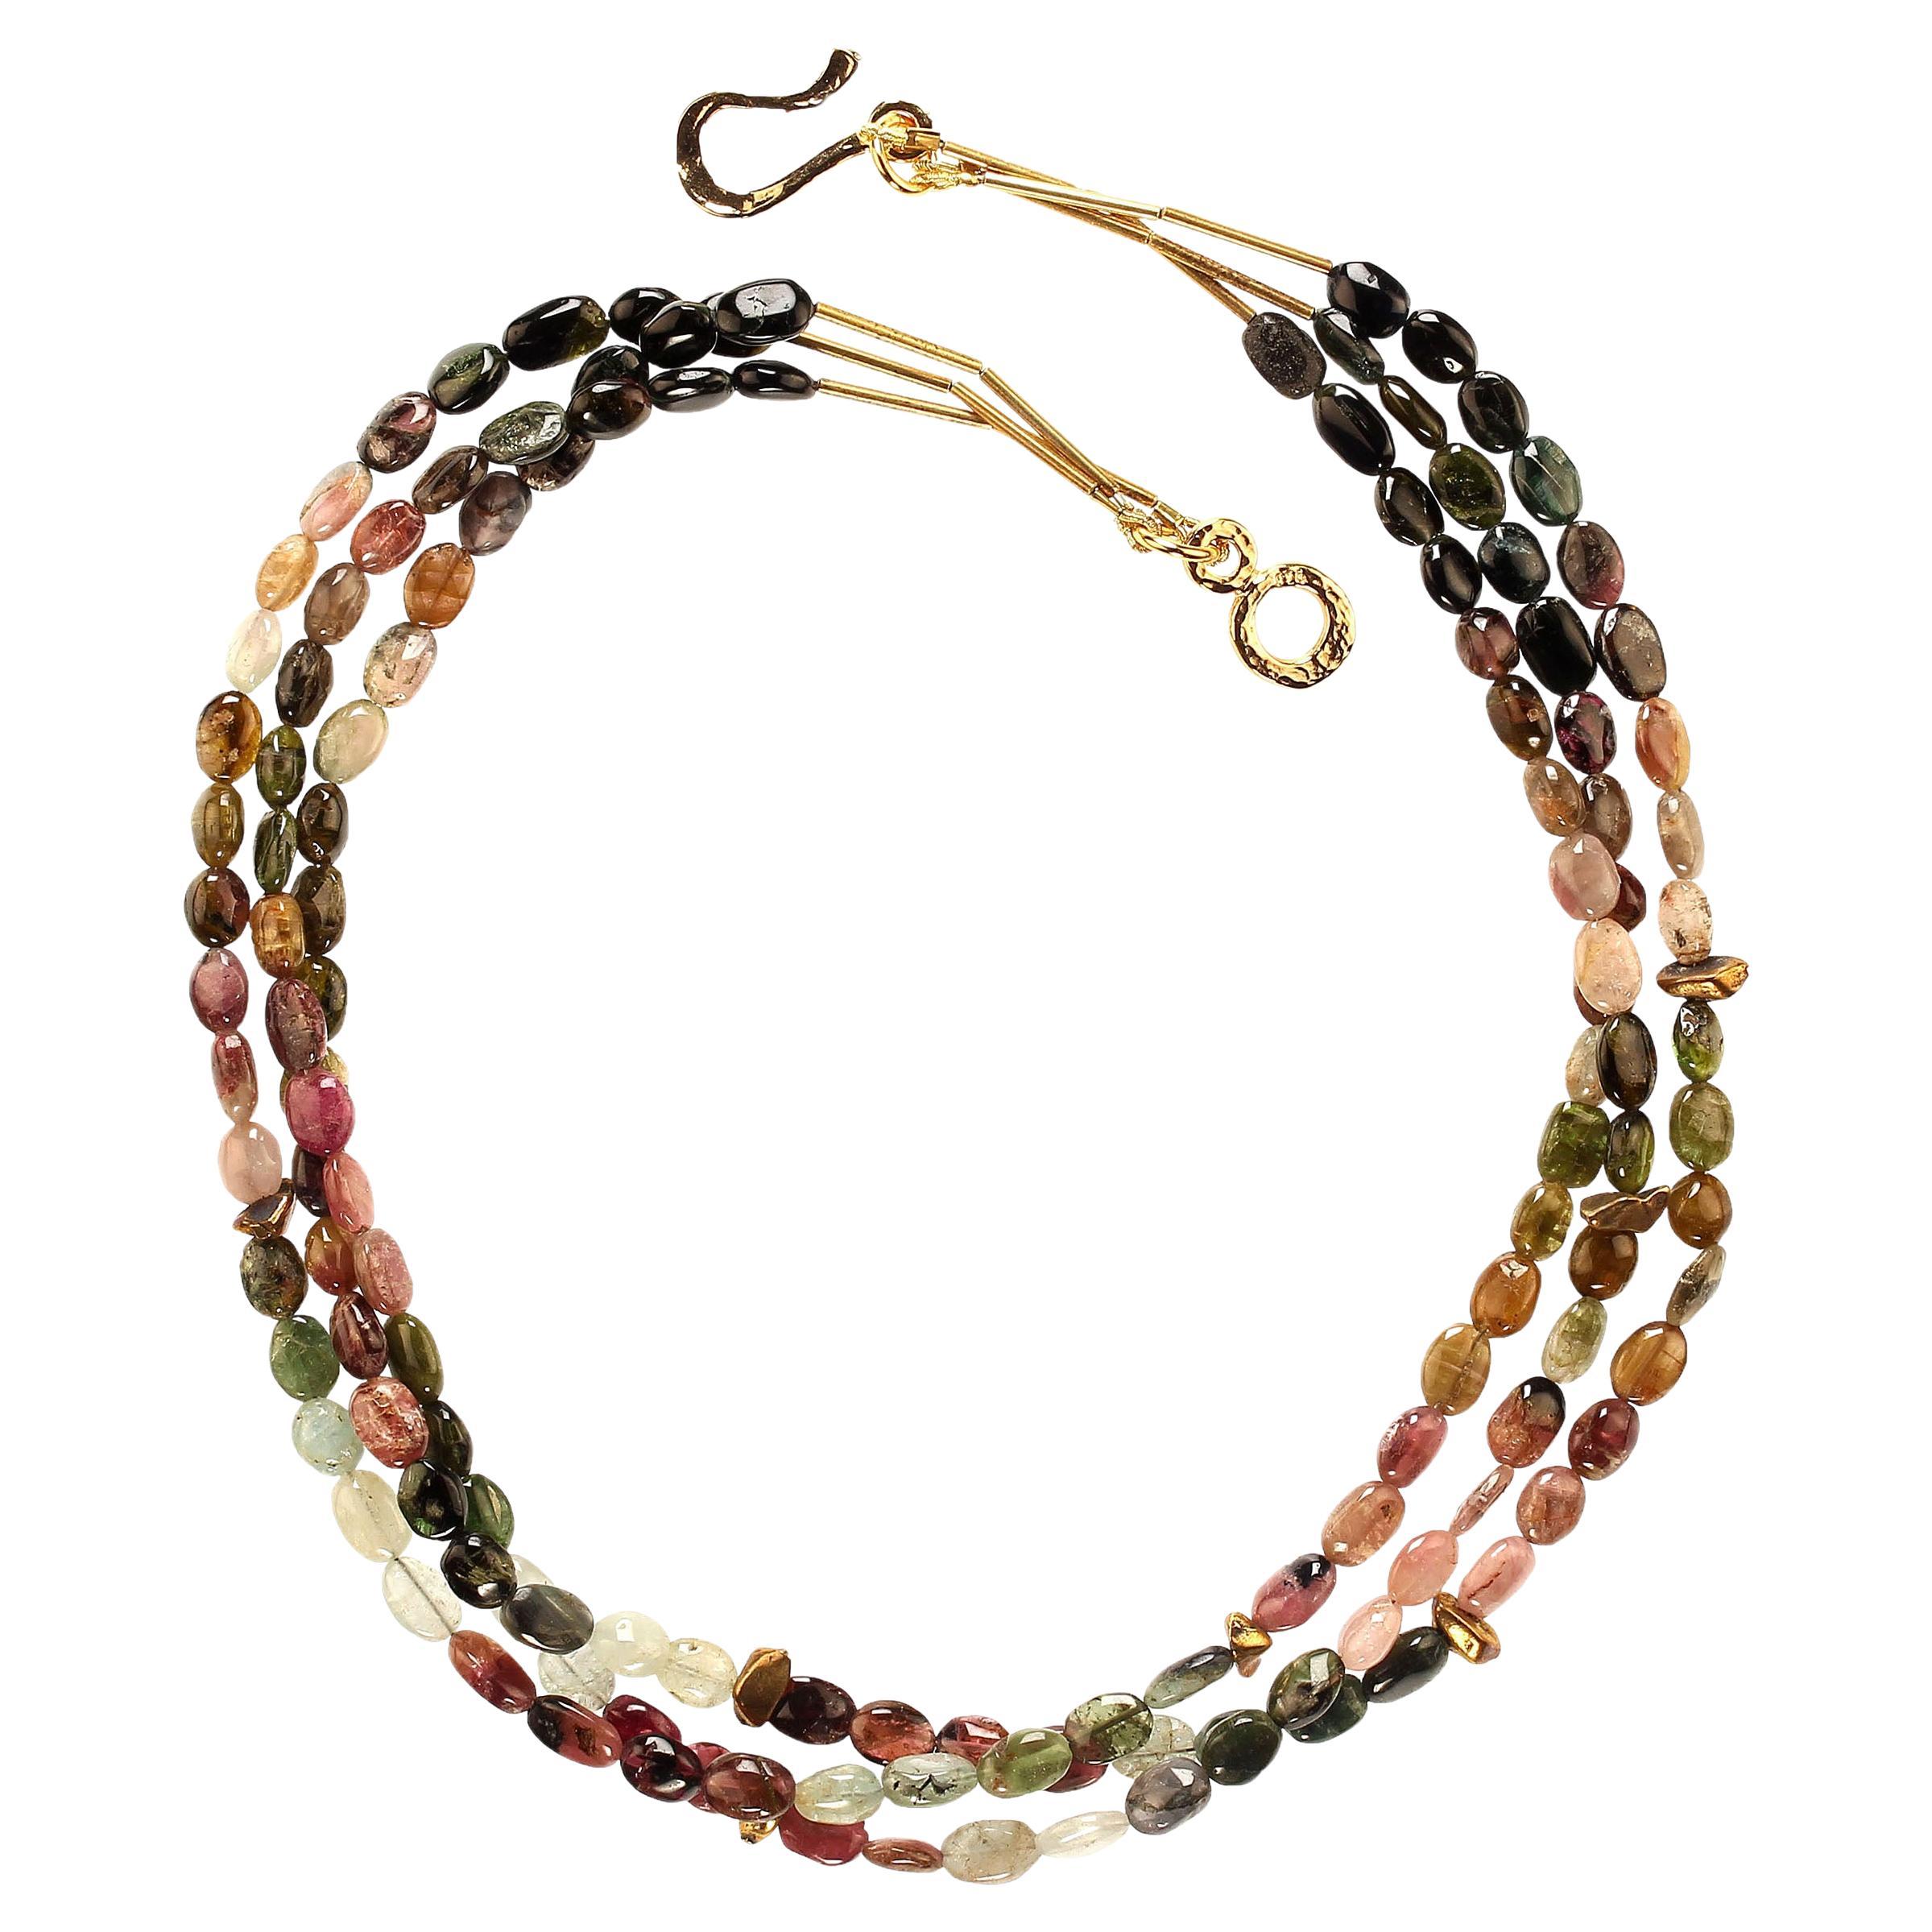 18 Inch necklace of smooth highly polished multi color tourmaline nuggets. Gold vermeil nuggets are featured accents among the nuggets.  These little beauties are approximately 7x5mm and are secured with a 14K gold vermeil hook and eye clasp.  MN2381